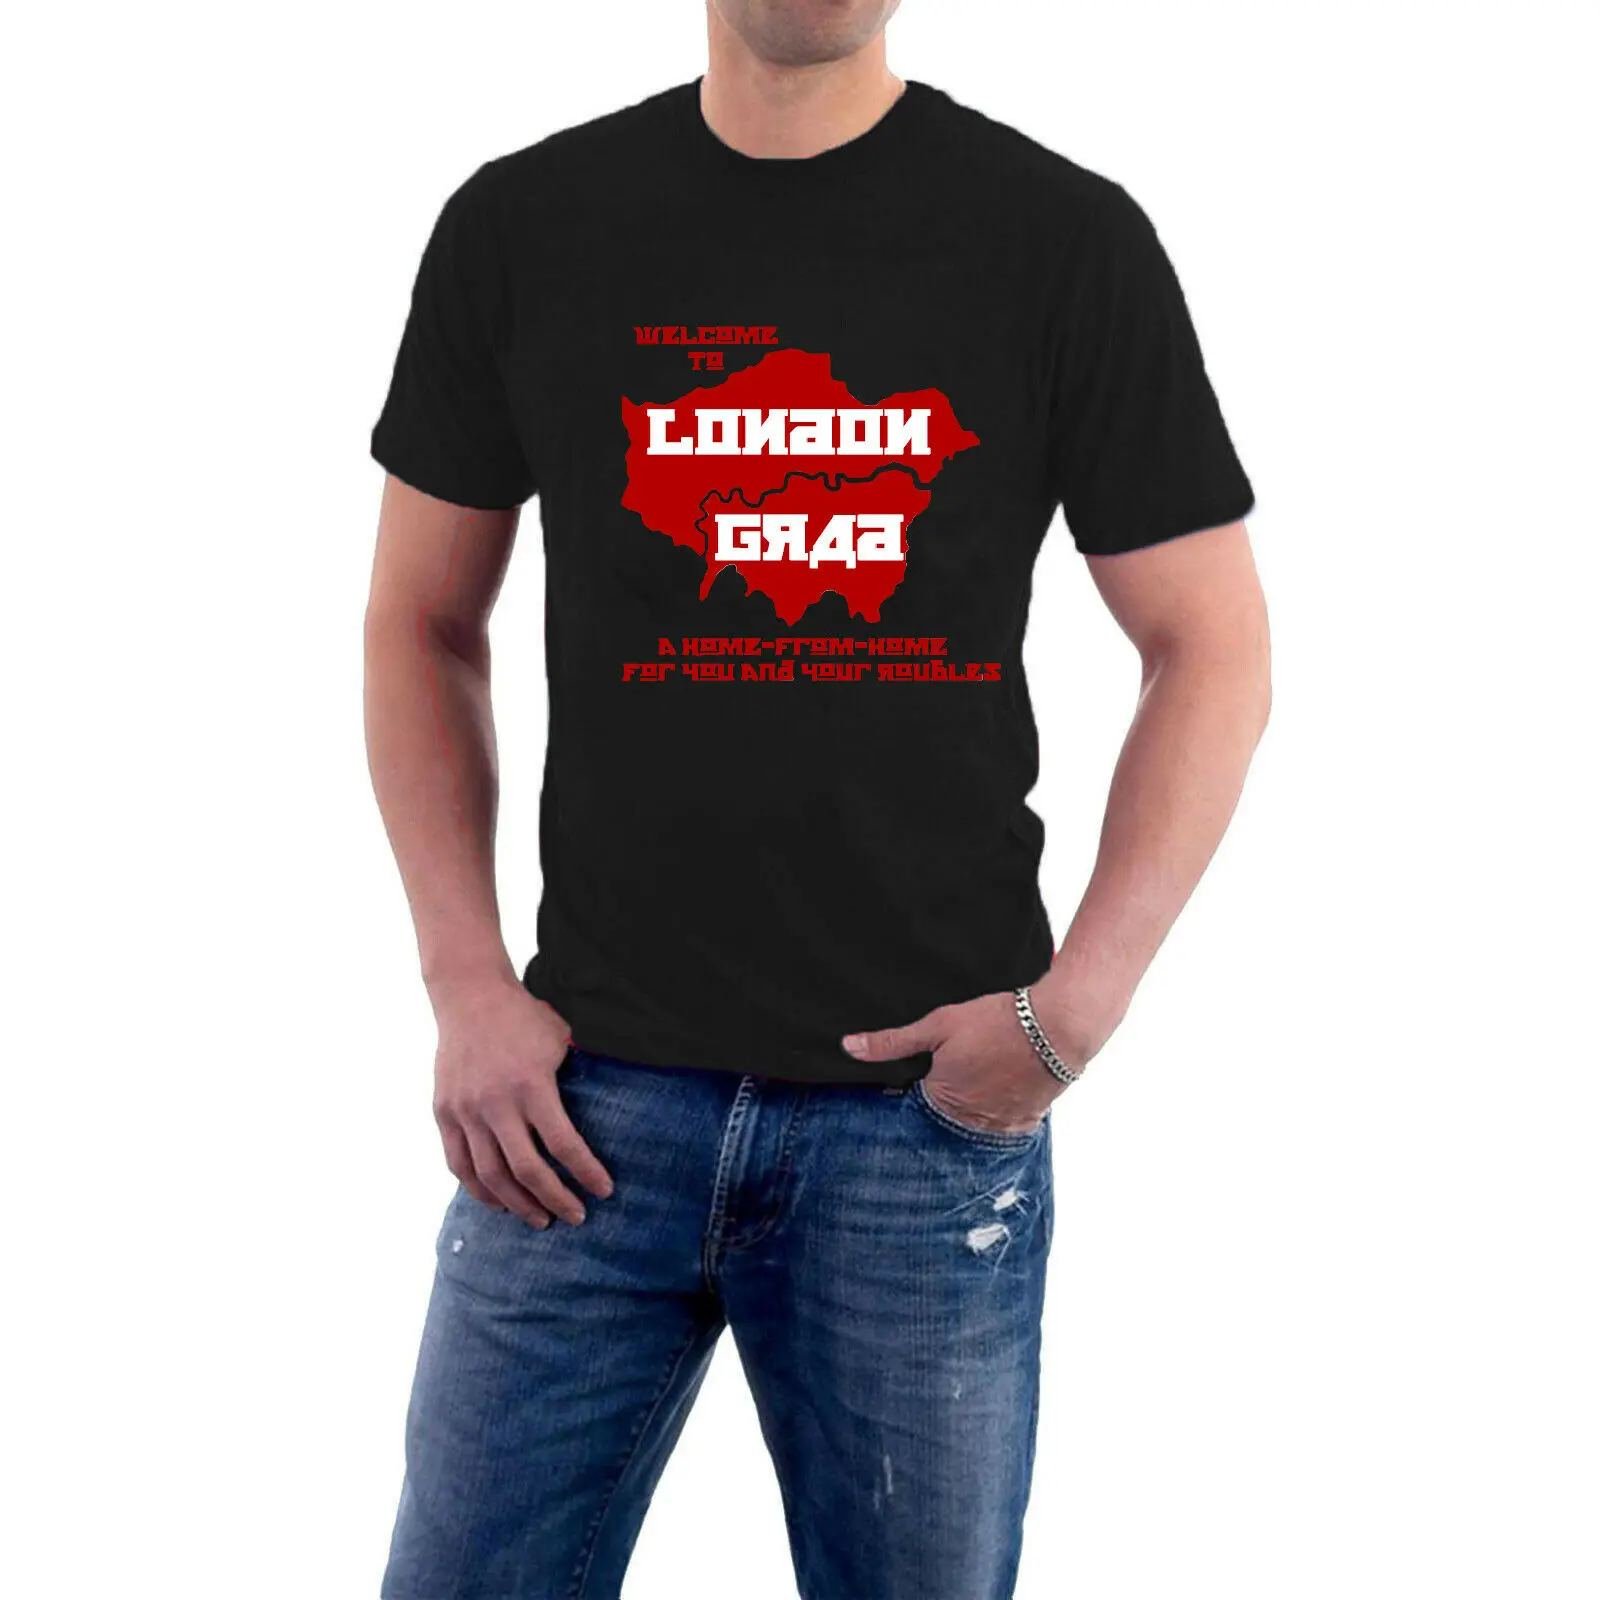 

London T-shirt WELCOME TO LONDONGRAD ROUBLES Russian UK Russia Tee Men's 100% Cotton Casual T-shirts Loose Top Size S-3XL